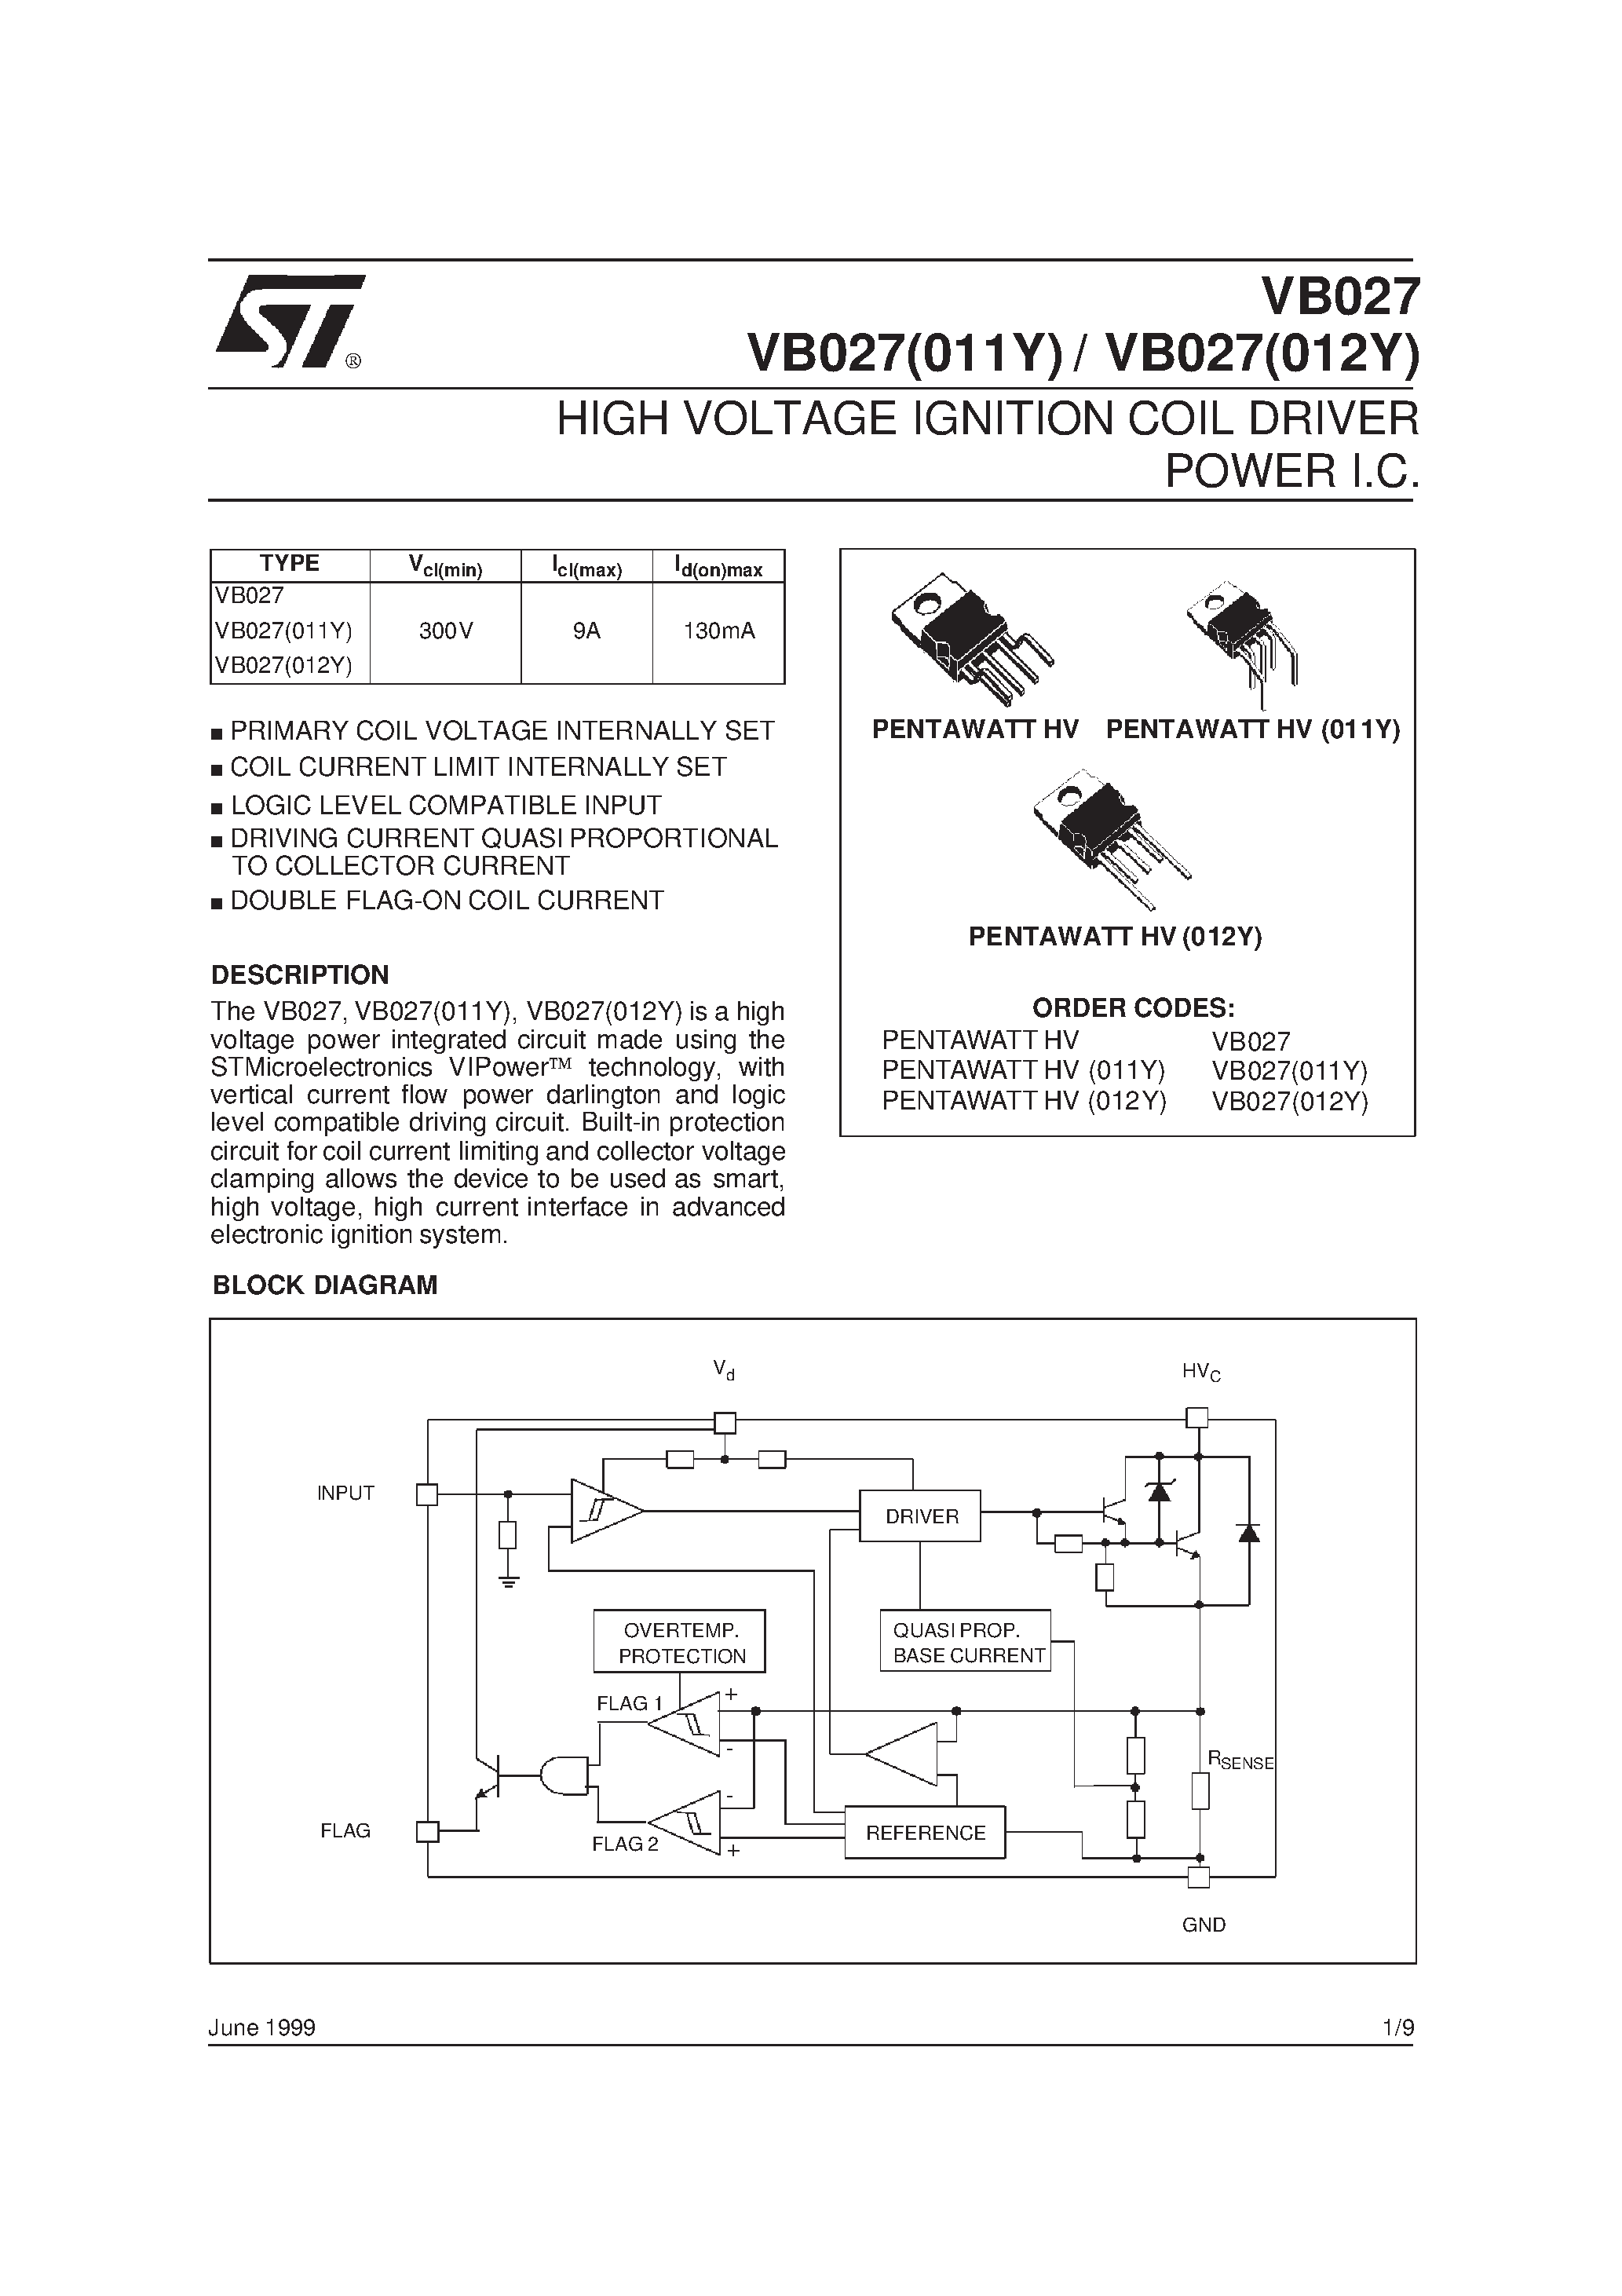 Datasheet VB027(011Y) - HIGH VOLTAGE IGNITION COIL DRIVER POWER I.C. page 1